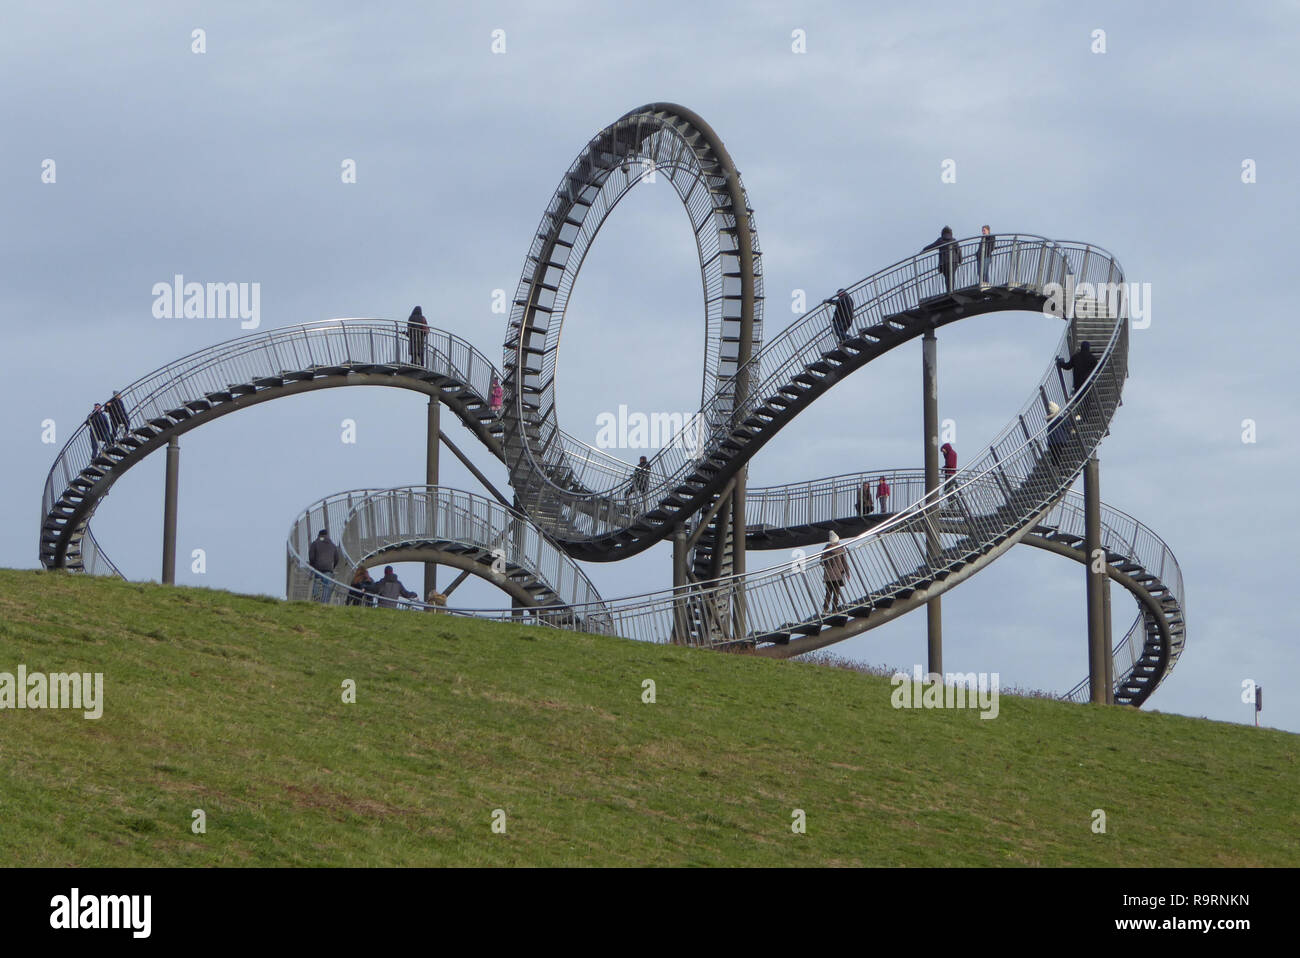 December 27, 2018 - Duisburg, North Rhine-Westphalia, Germany - People can  be seen walking on the 'Tiger and Turtle ""“ Magic Mountain' art  installation in Angerpark, Duisburg, Germany. Designed by ULRICH GENTH